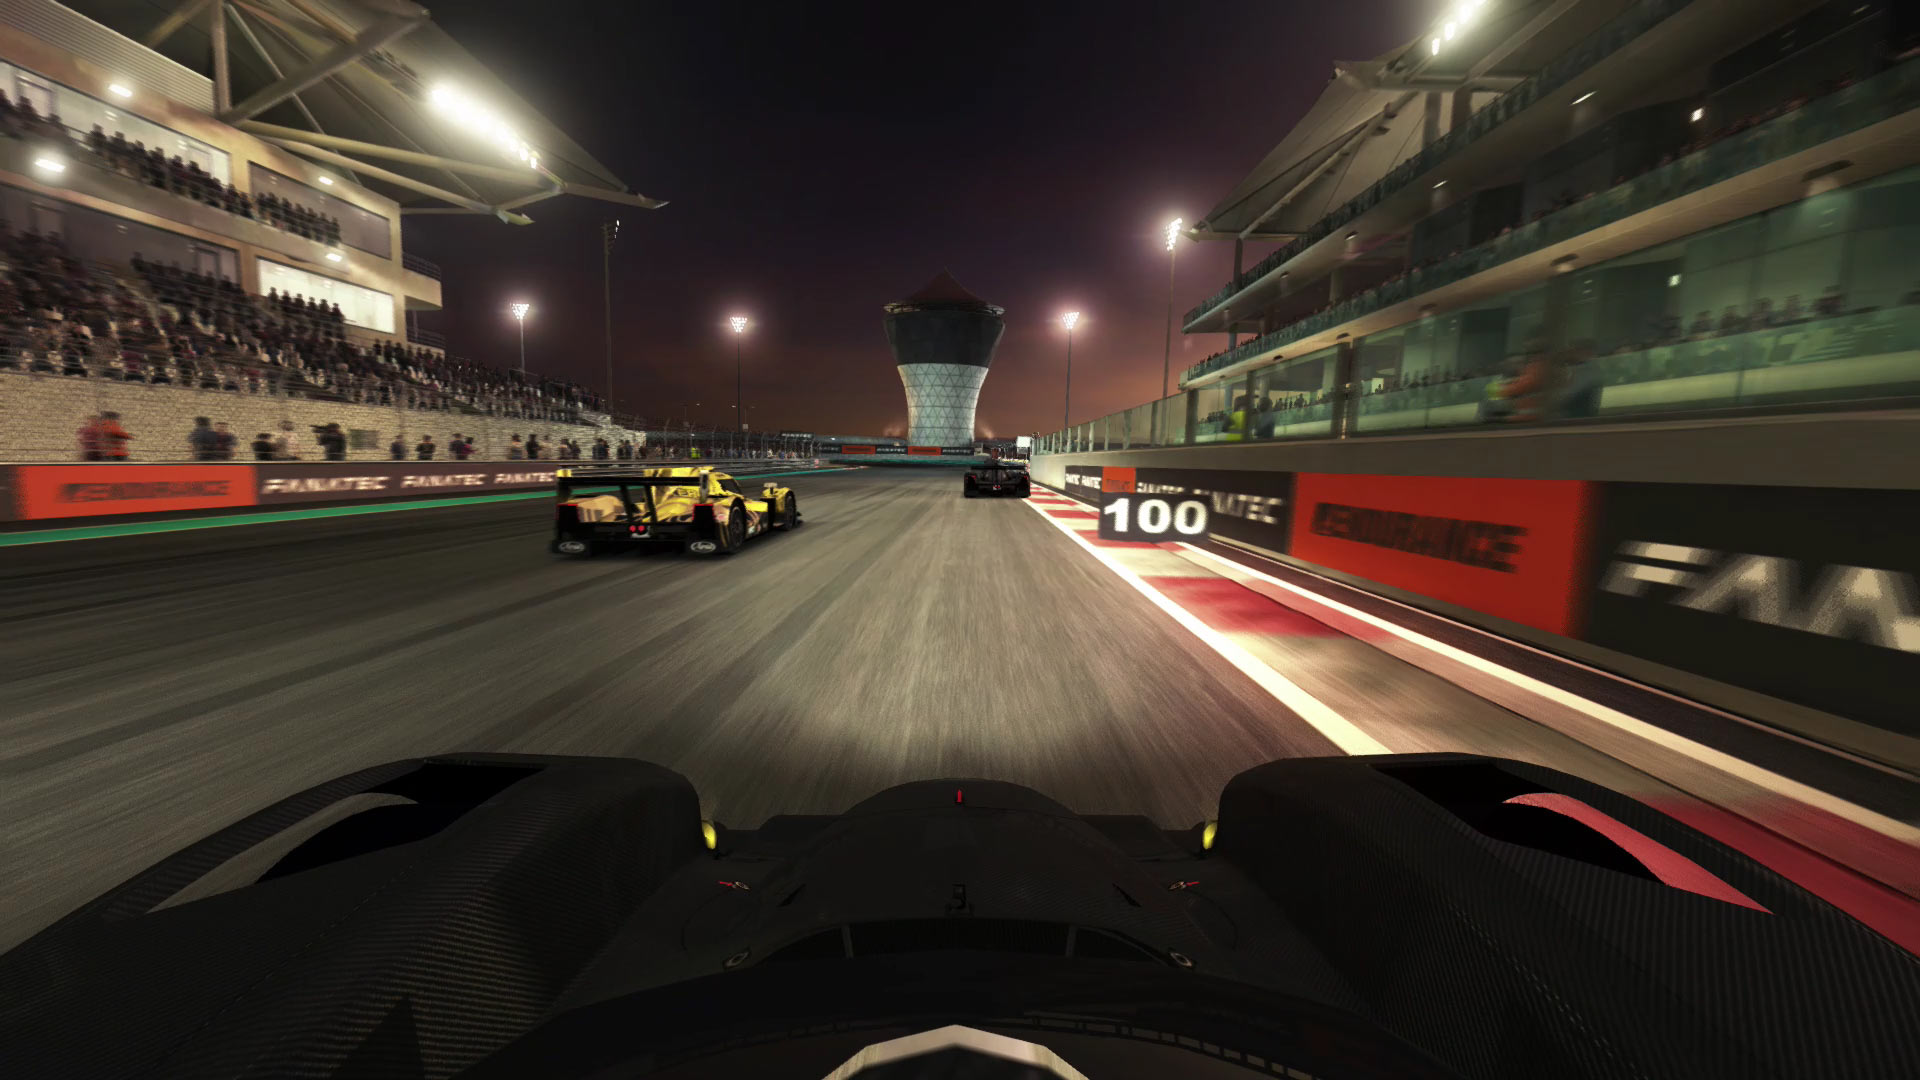 GRID™ Autosport Custom Edition for Android - Download